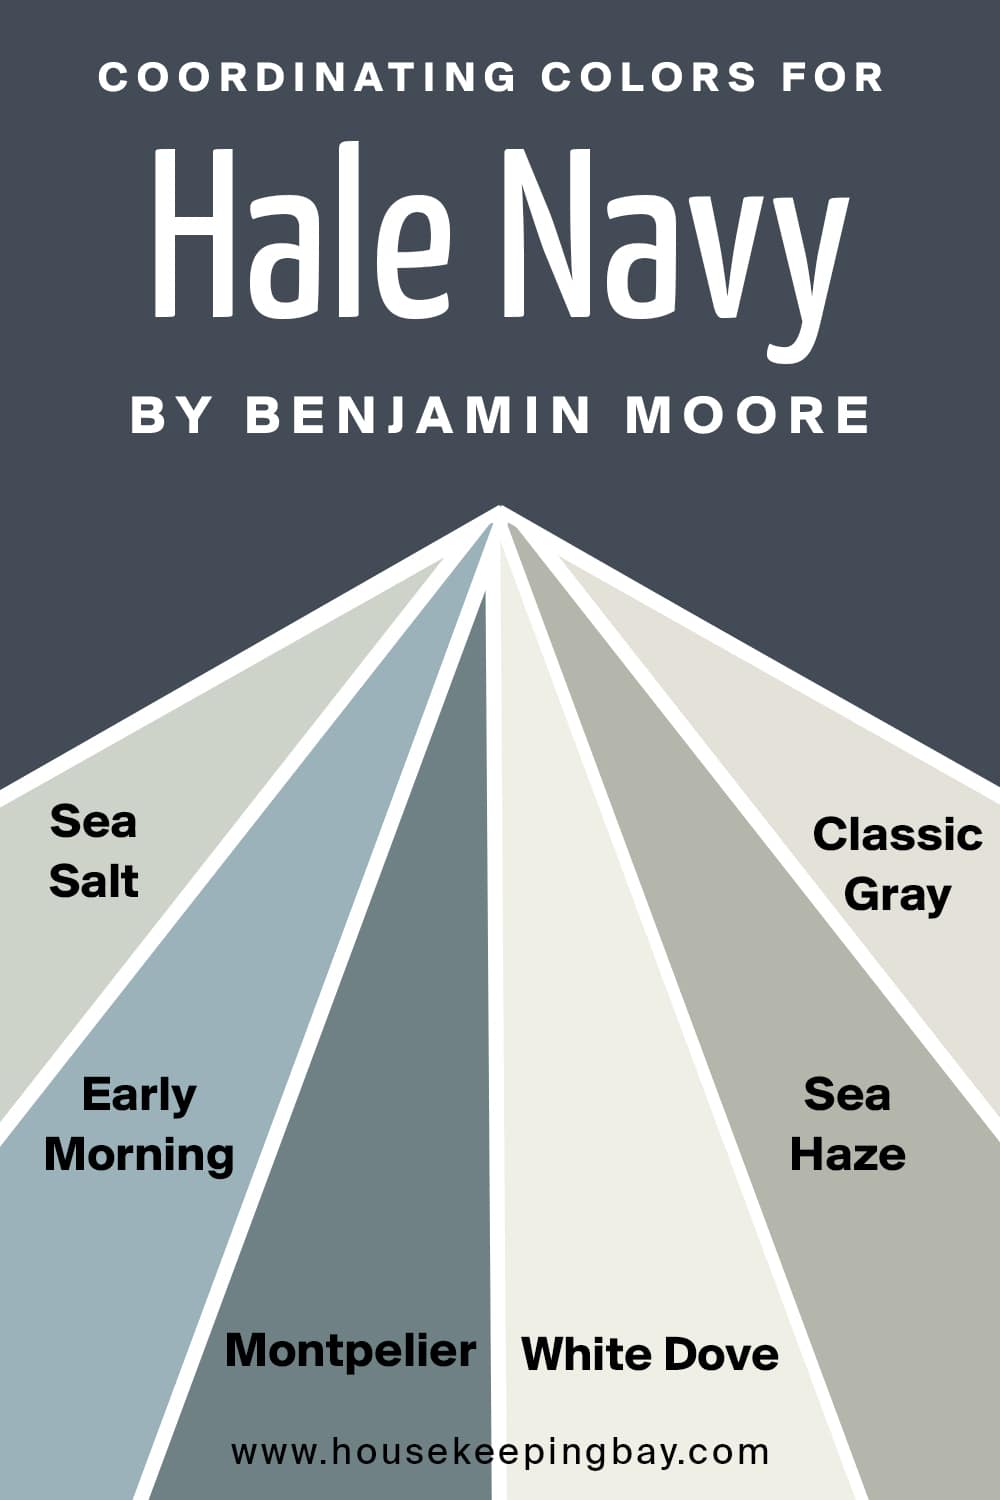 Coordinating Colors for Hale Navy by Benjamin Moore